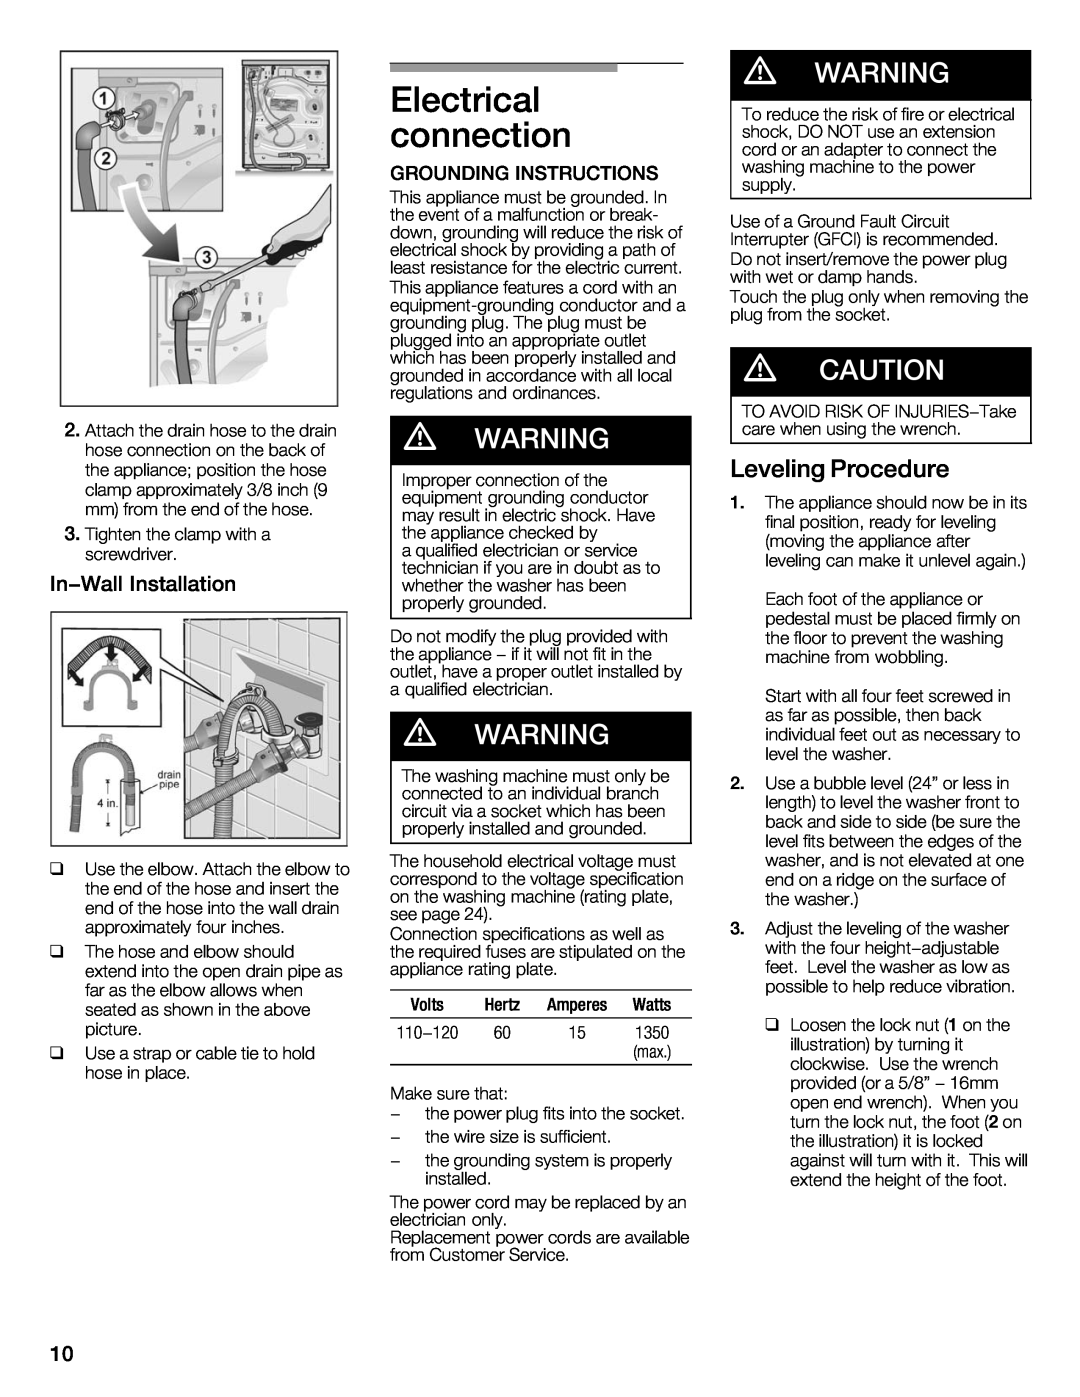 Bosch Appliances 500 Plus Series manual Electrical, connection, d WARNING 